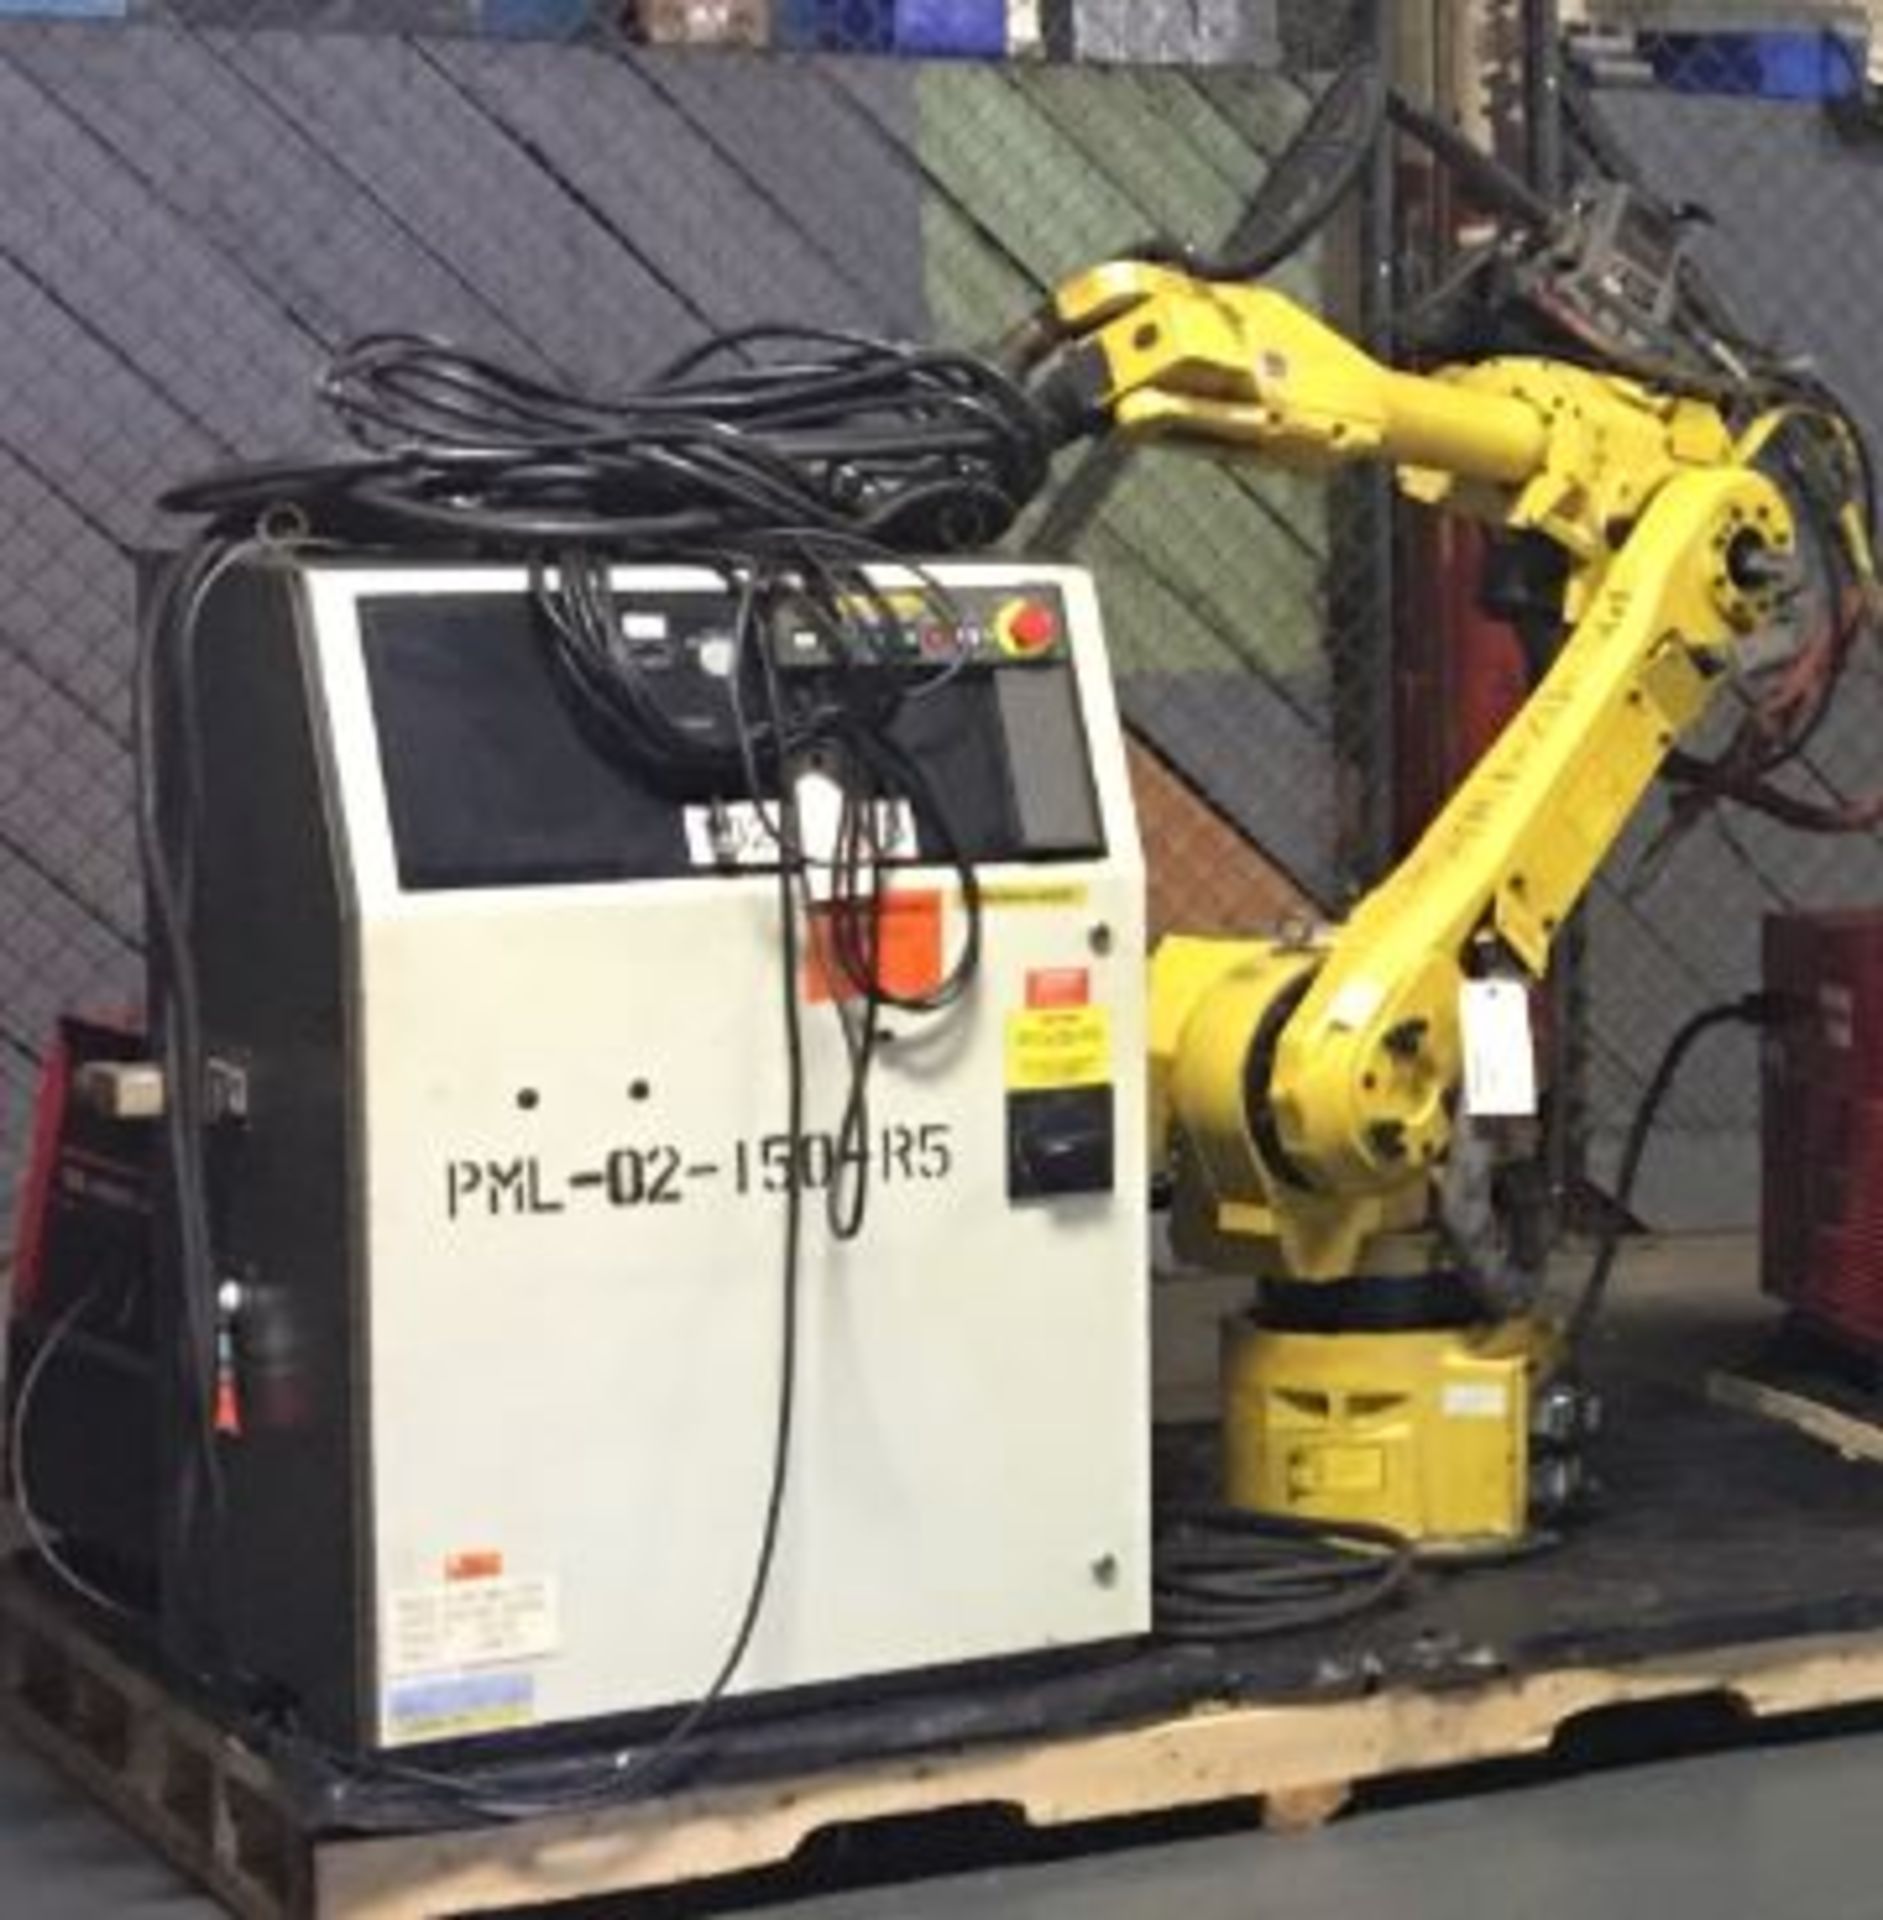 2005 FANUC ARCMATE 120iB W/R-J3iB CONTROLS, CABLES, TEACH PENDANT AND LINCOLN 455M POWER SUPPLY